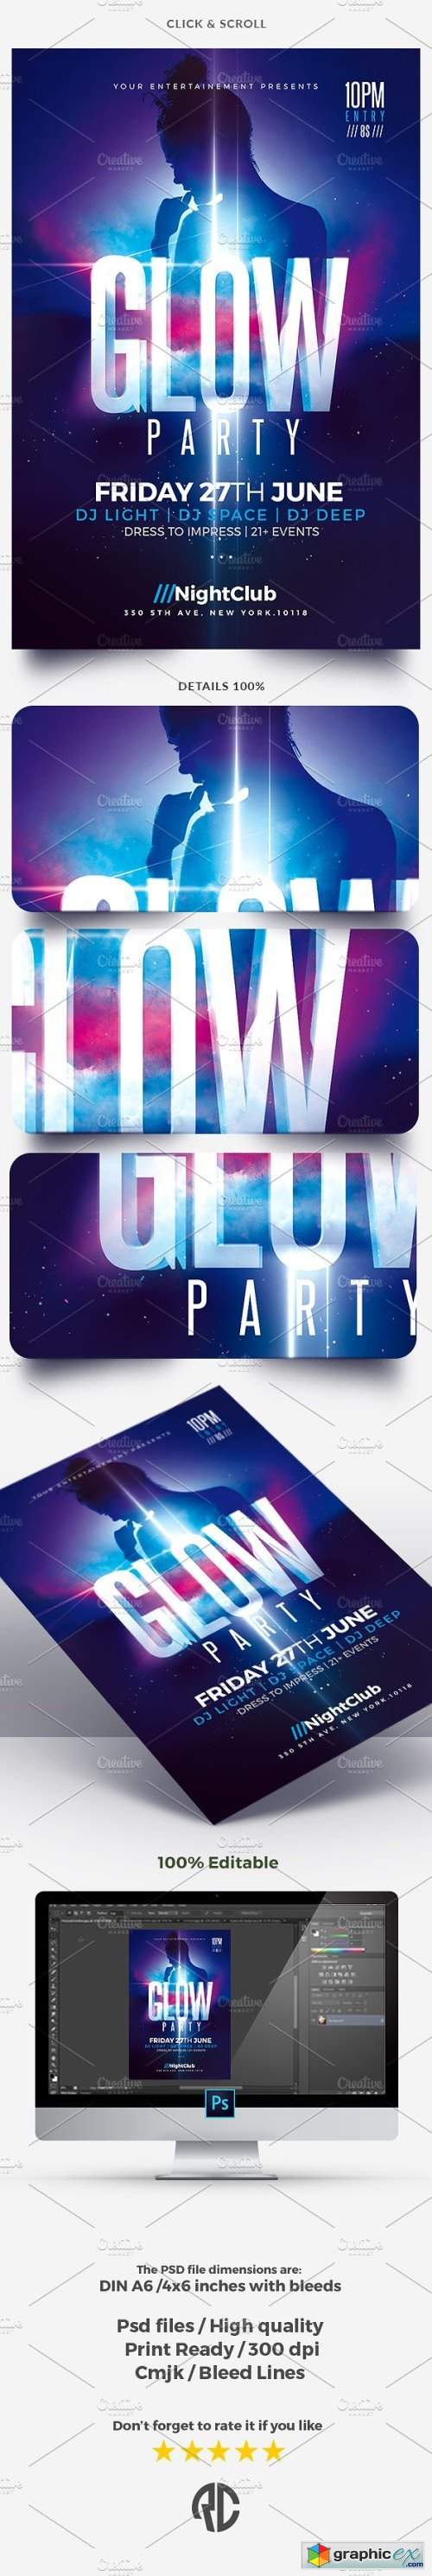 Glow Party - Flyer Template